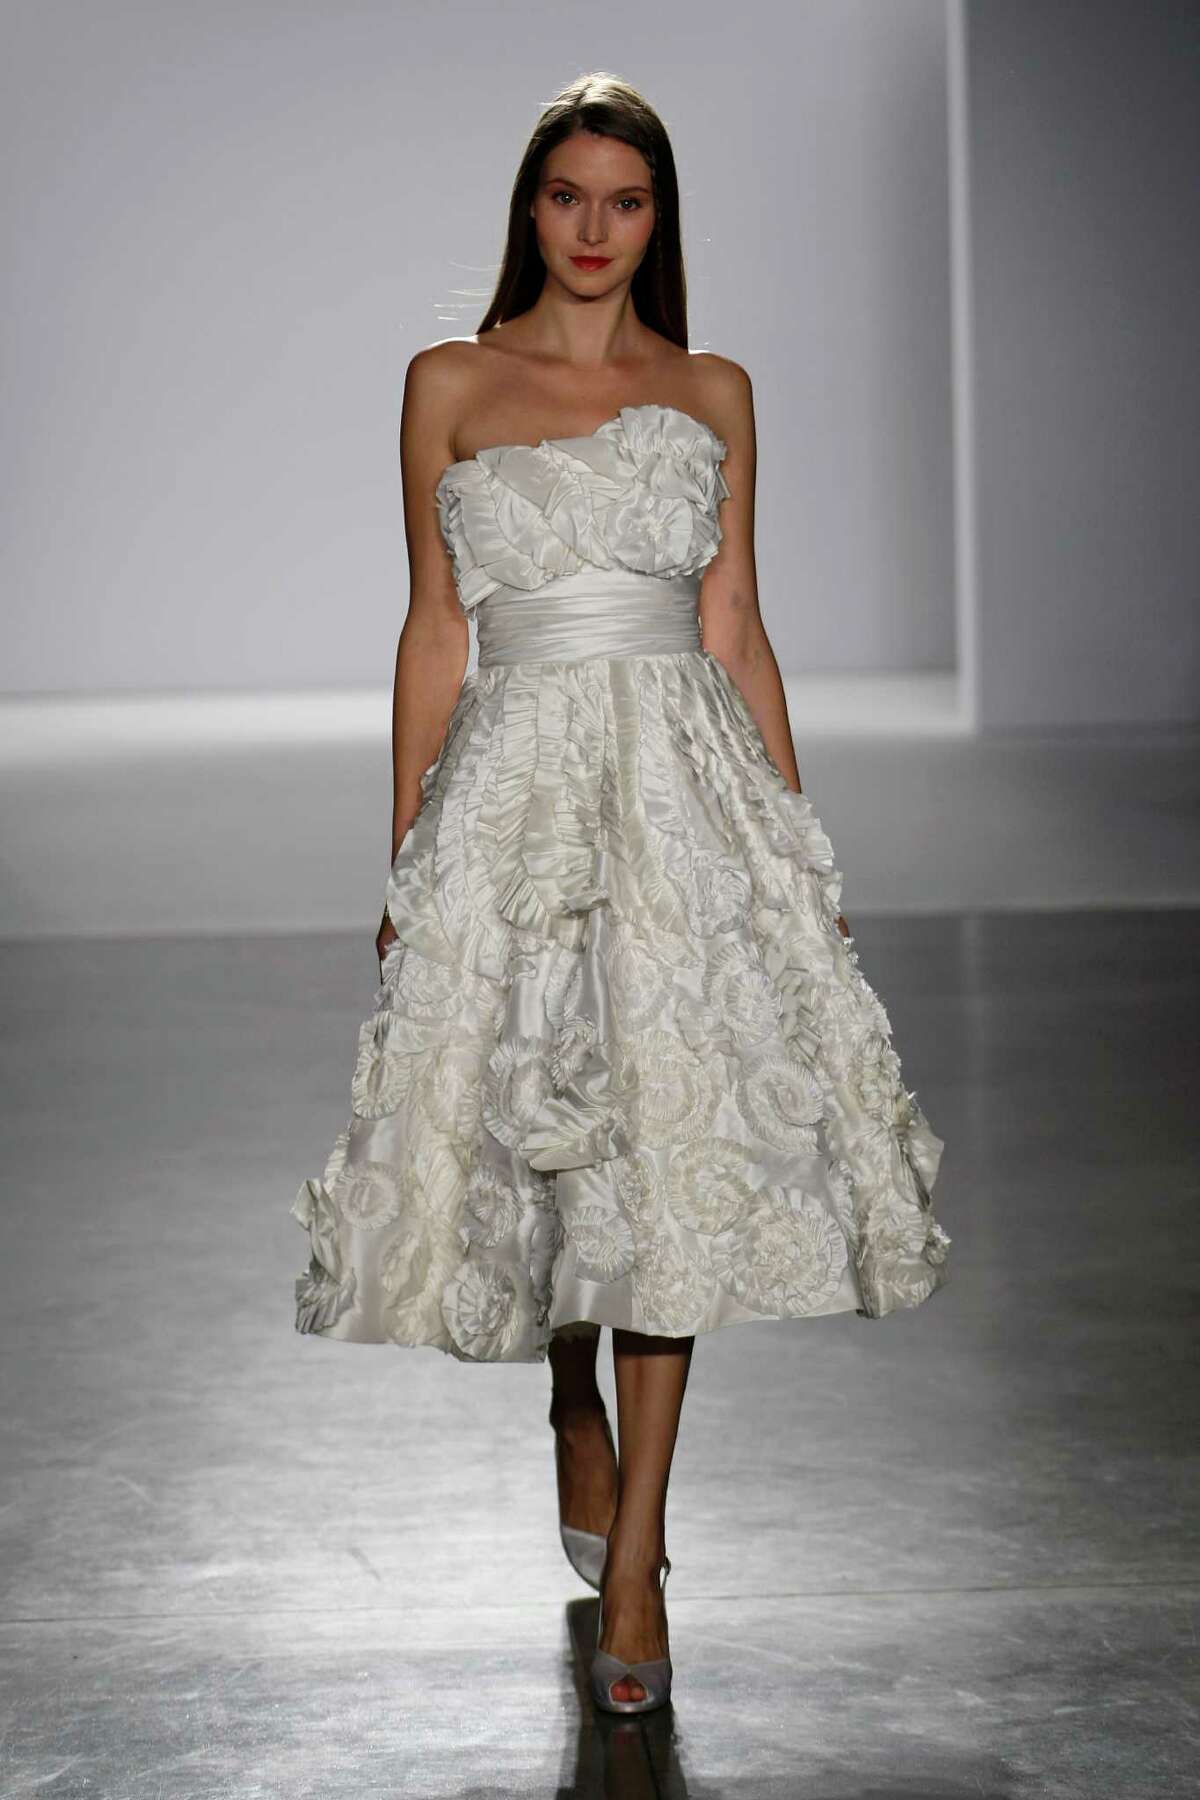 New wedding dress trend leaves little to the imagination